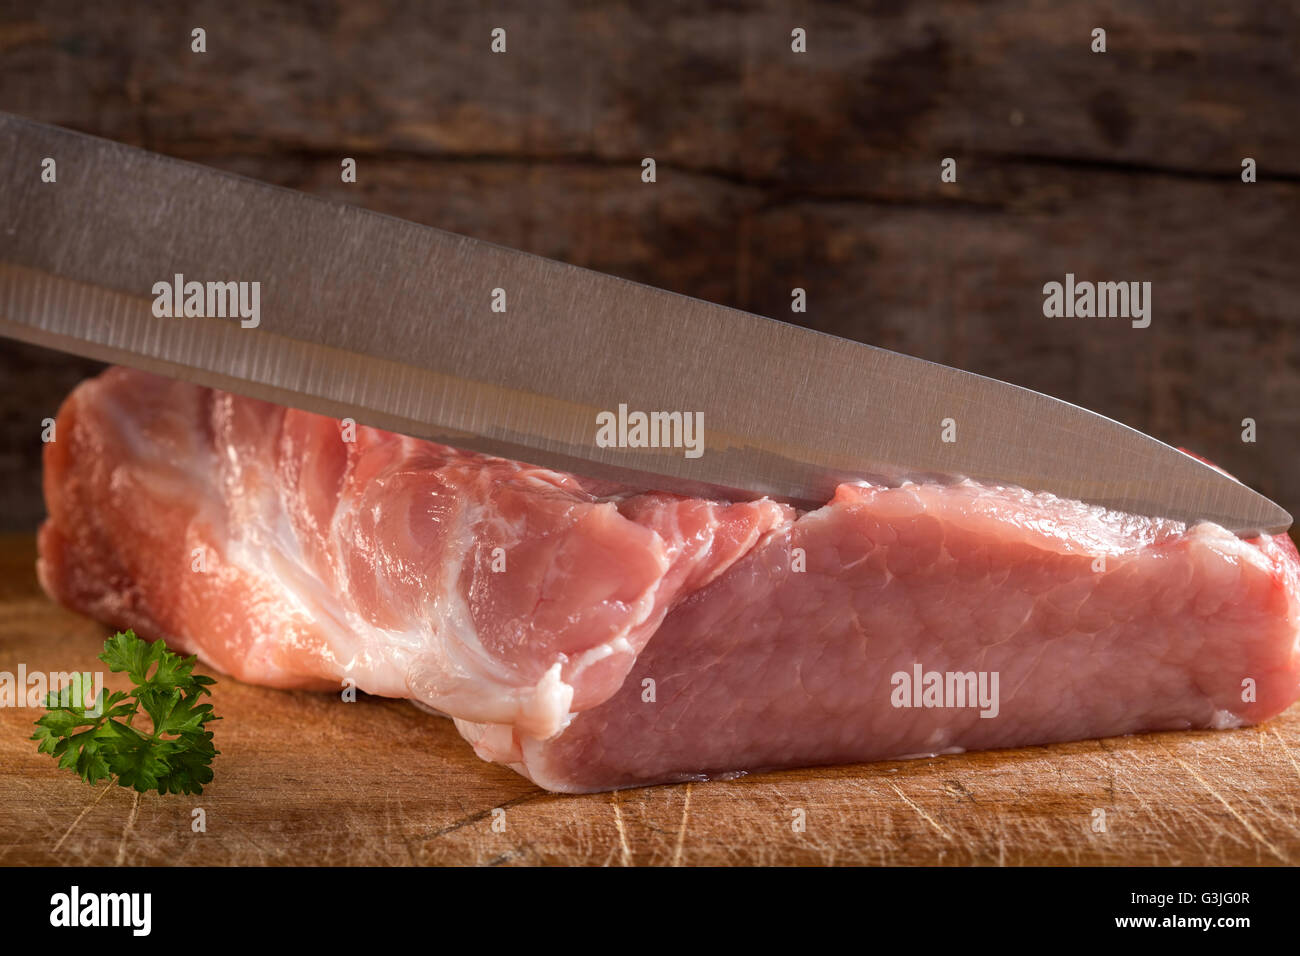 Slicing pork tenderloin with herb on wooden background Stock Photo